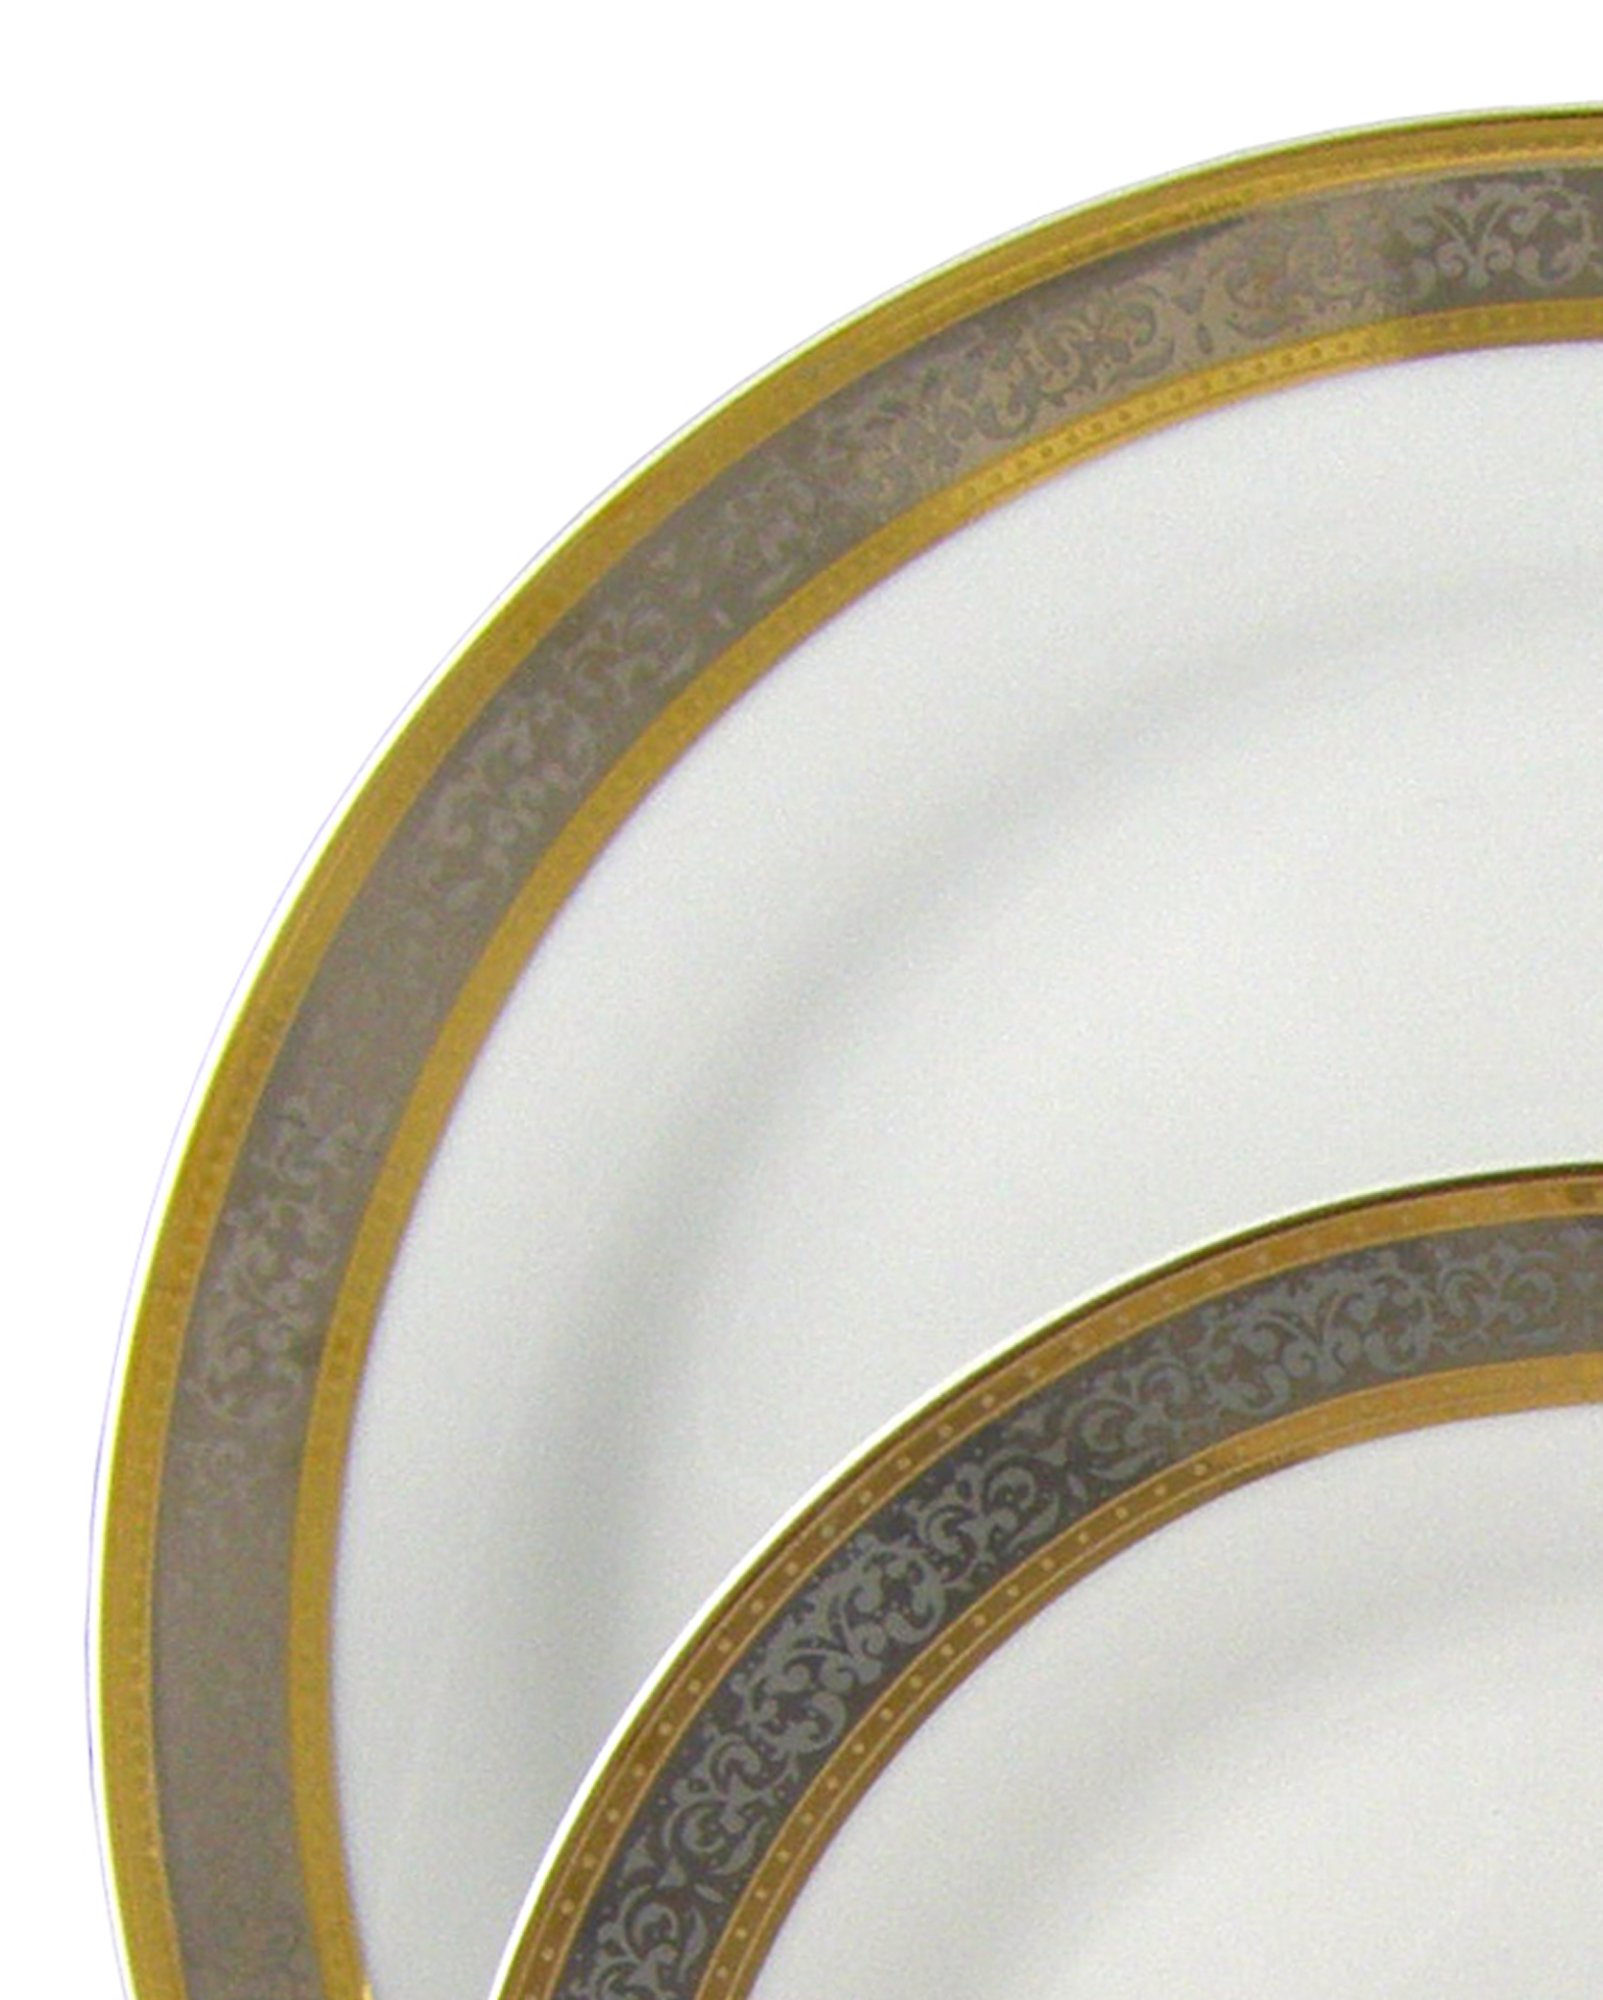 8.25 inch plate